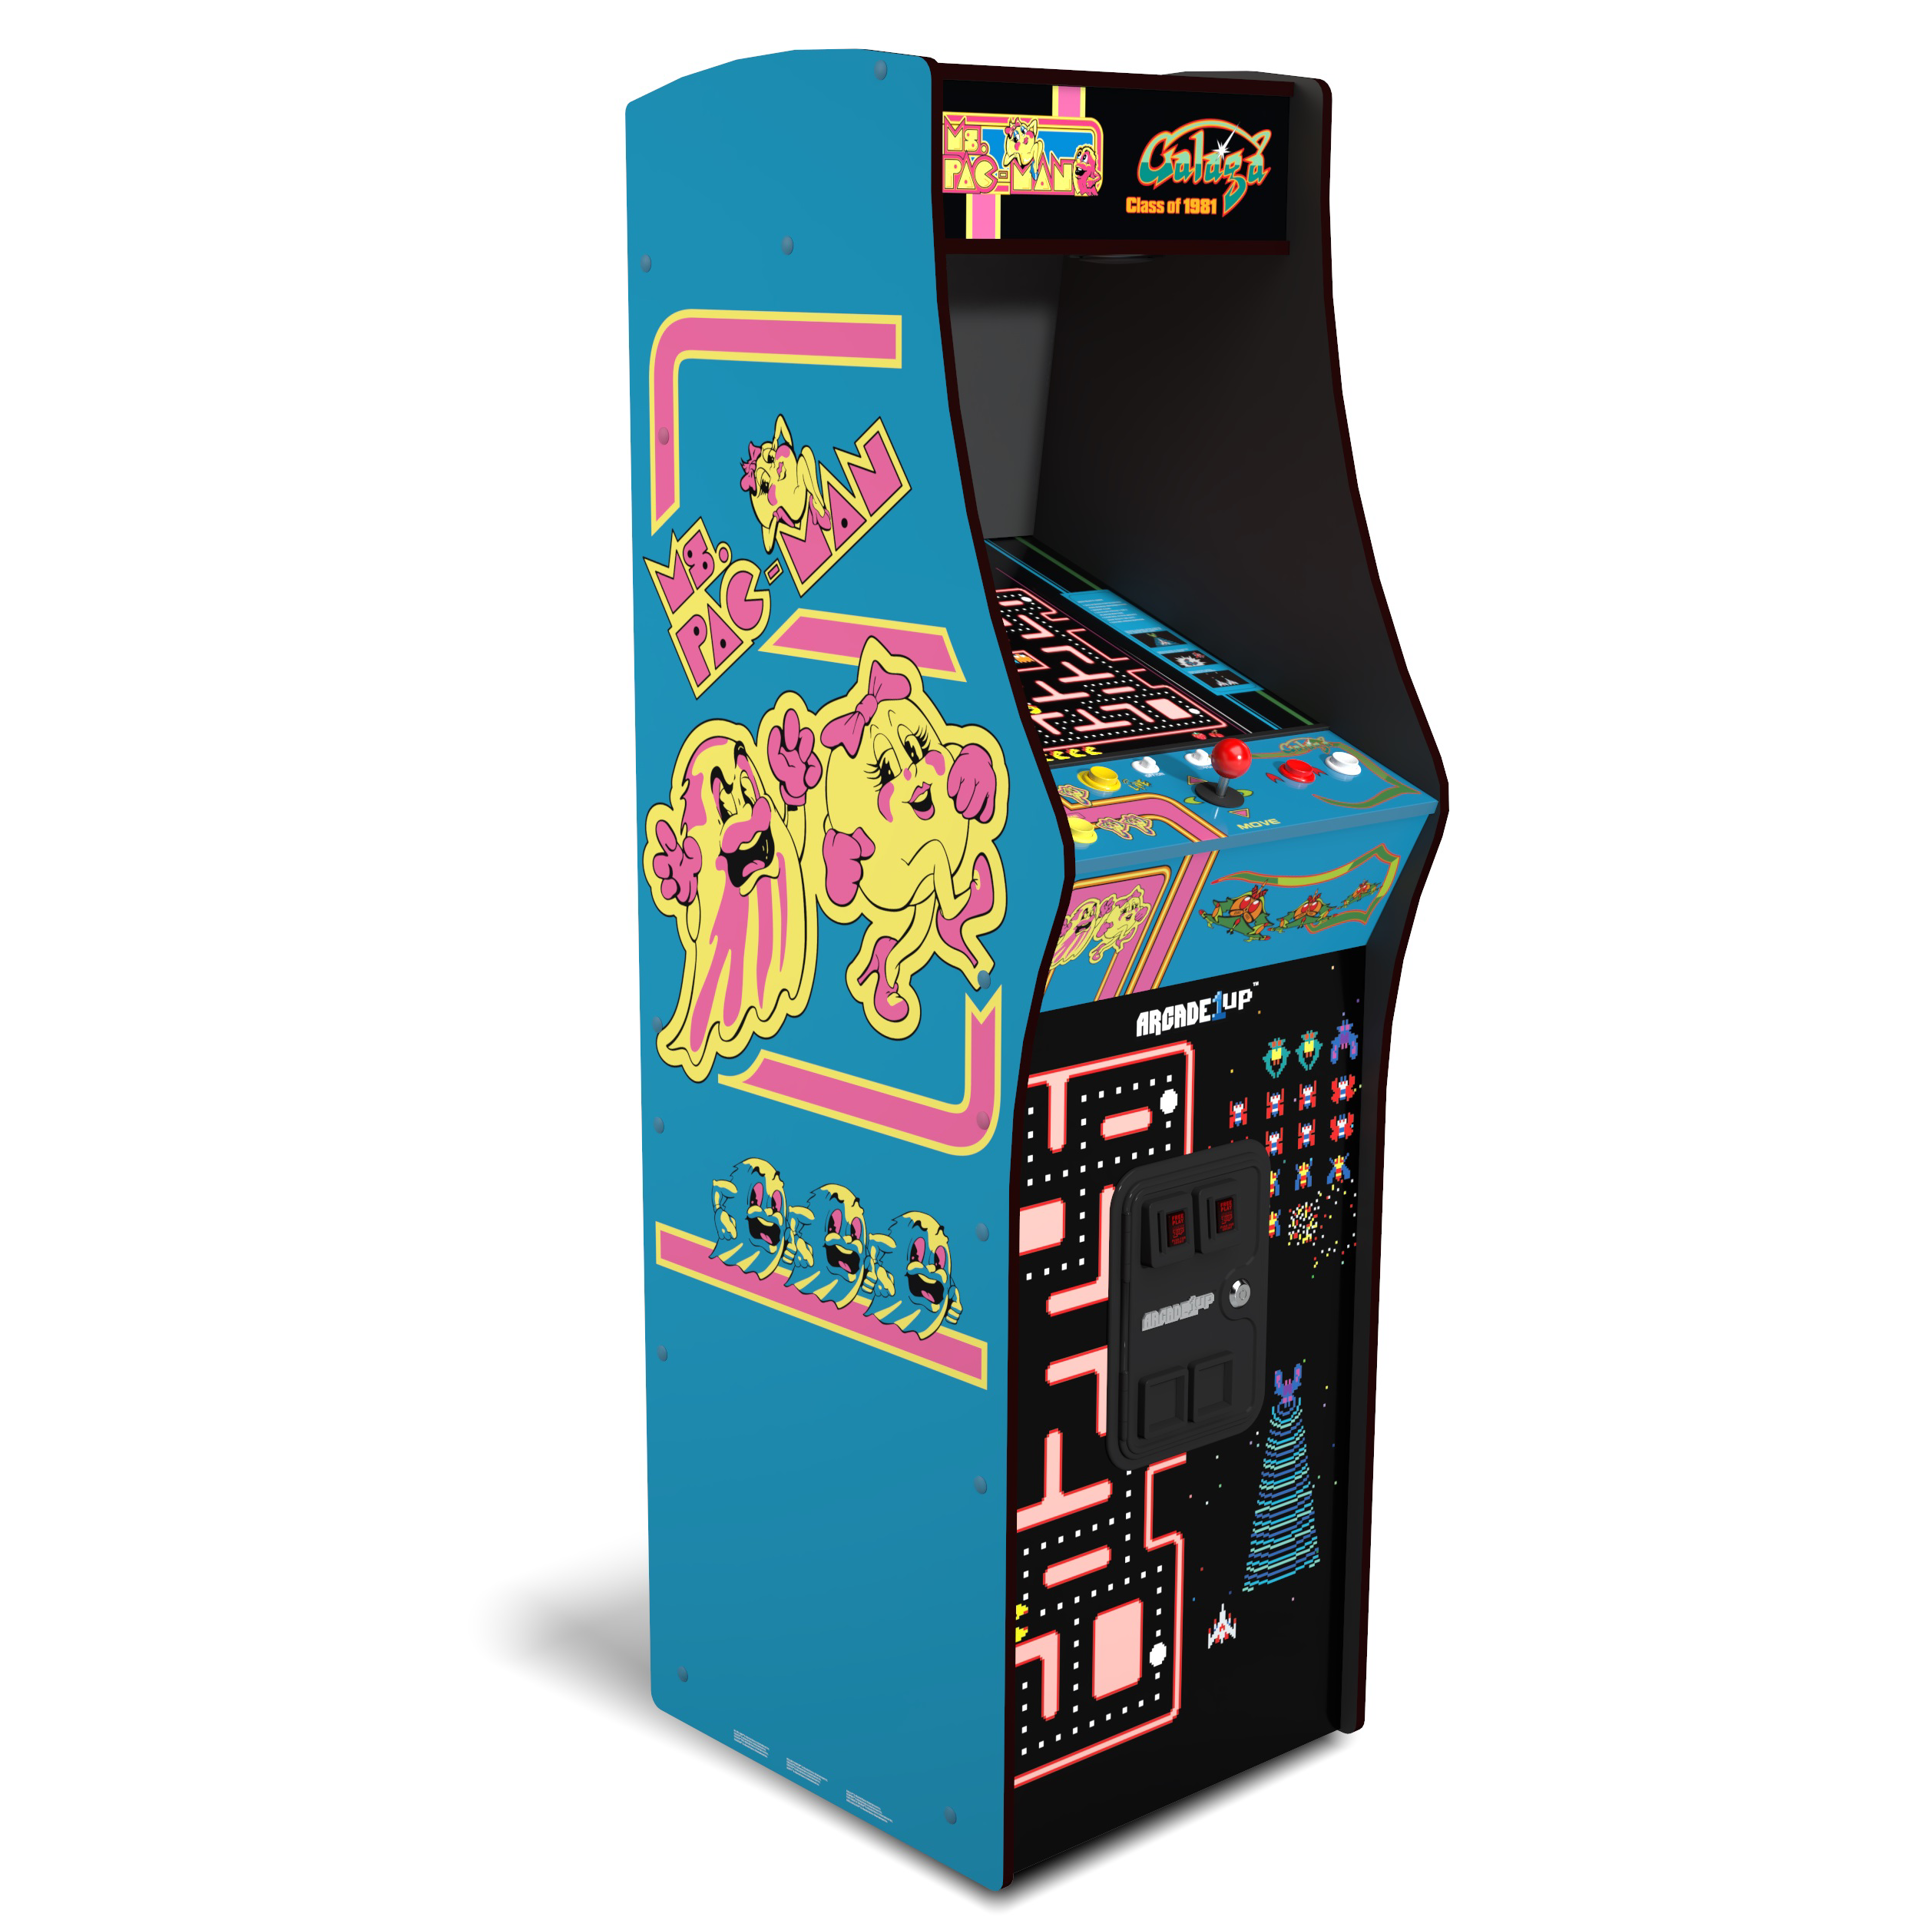 Arcade1Up - Ms. Pac-Man vs Galaga - Class of 81 - Deluxe Arcade Machine